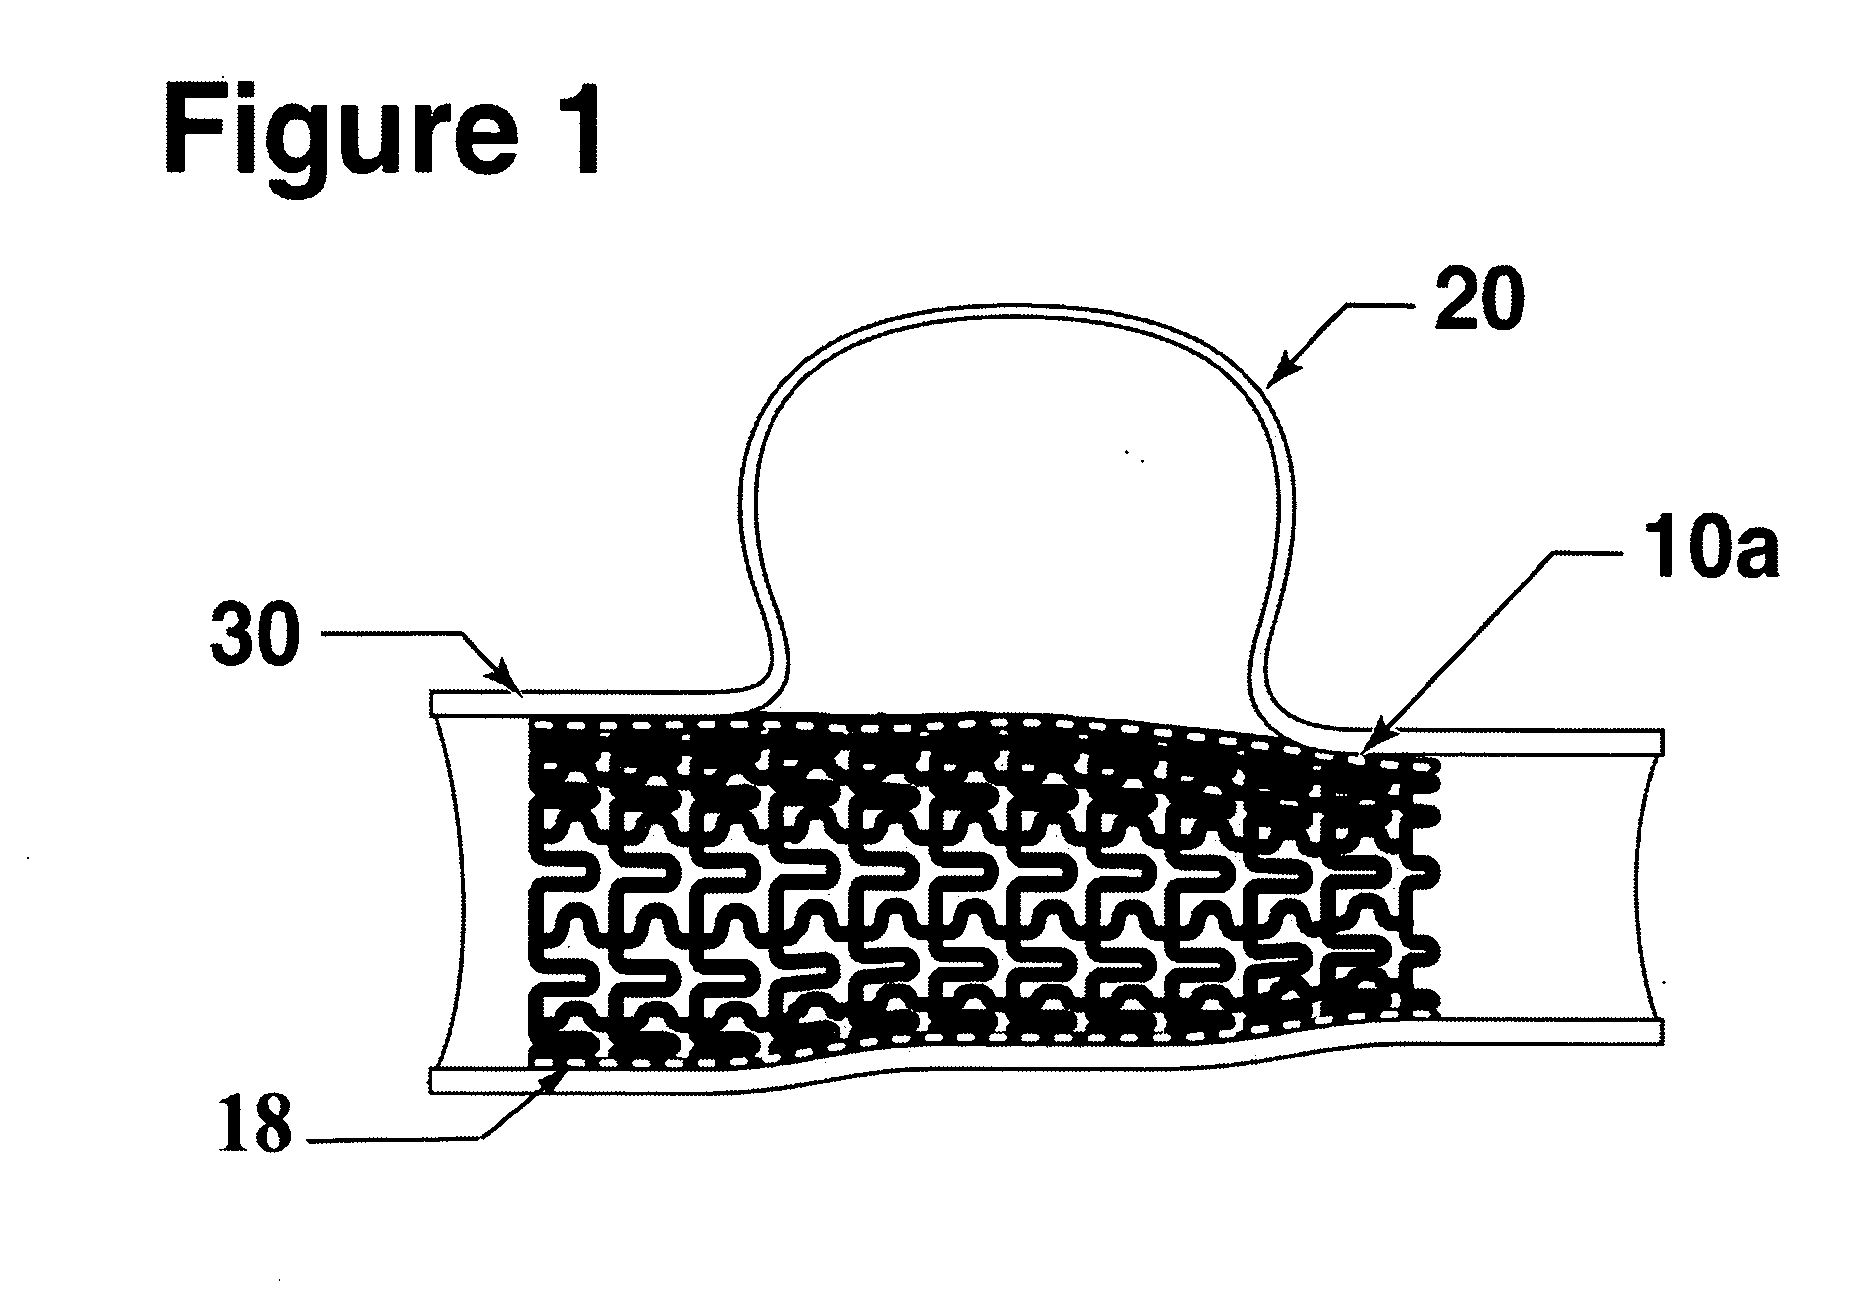 Micro-pleated stent assembly